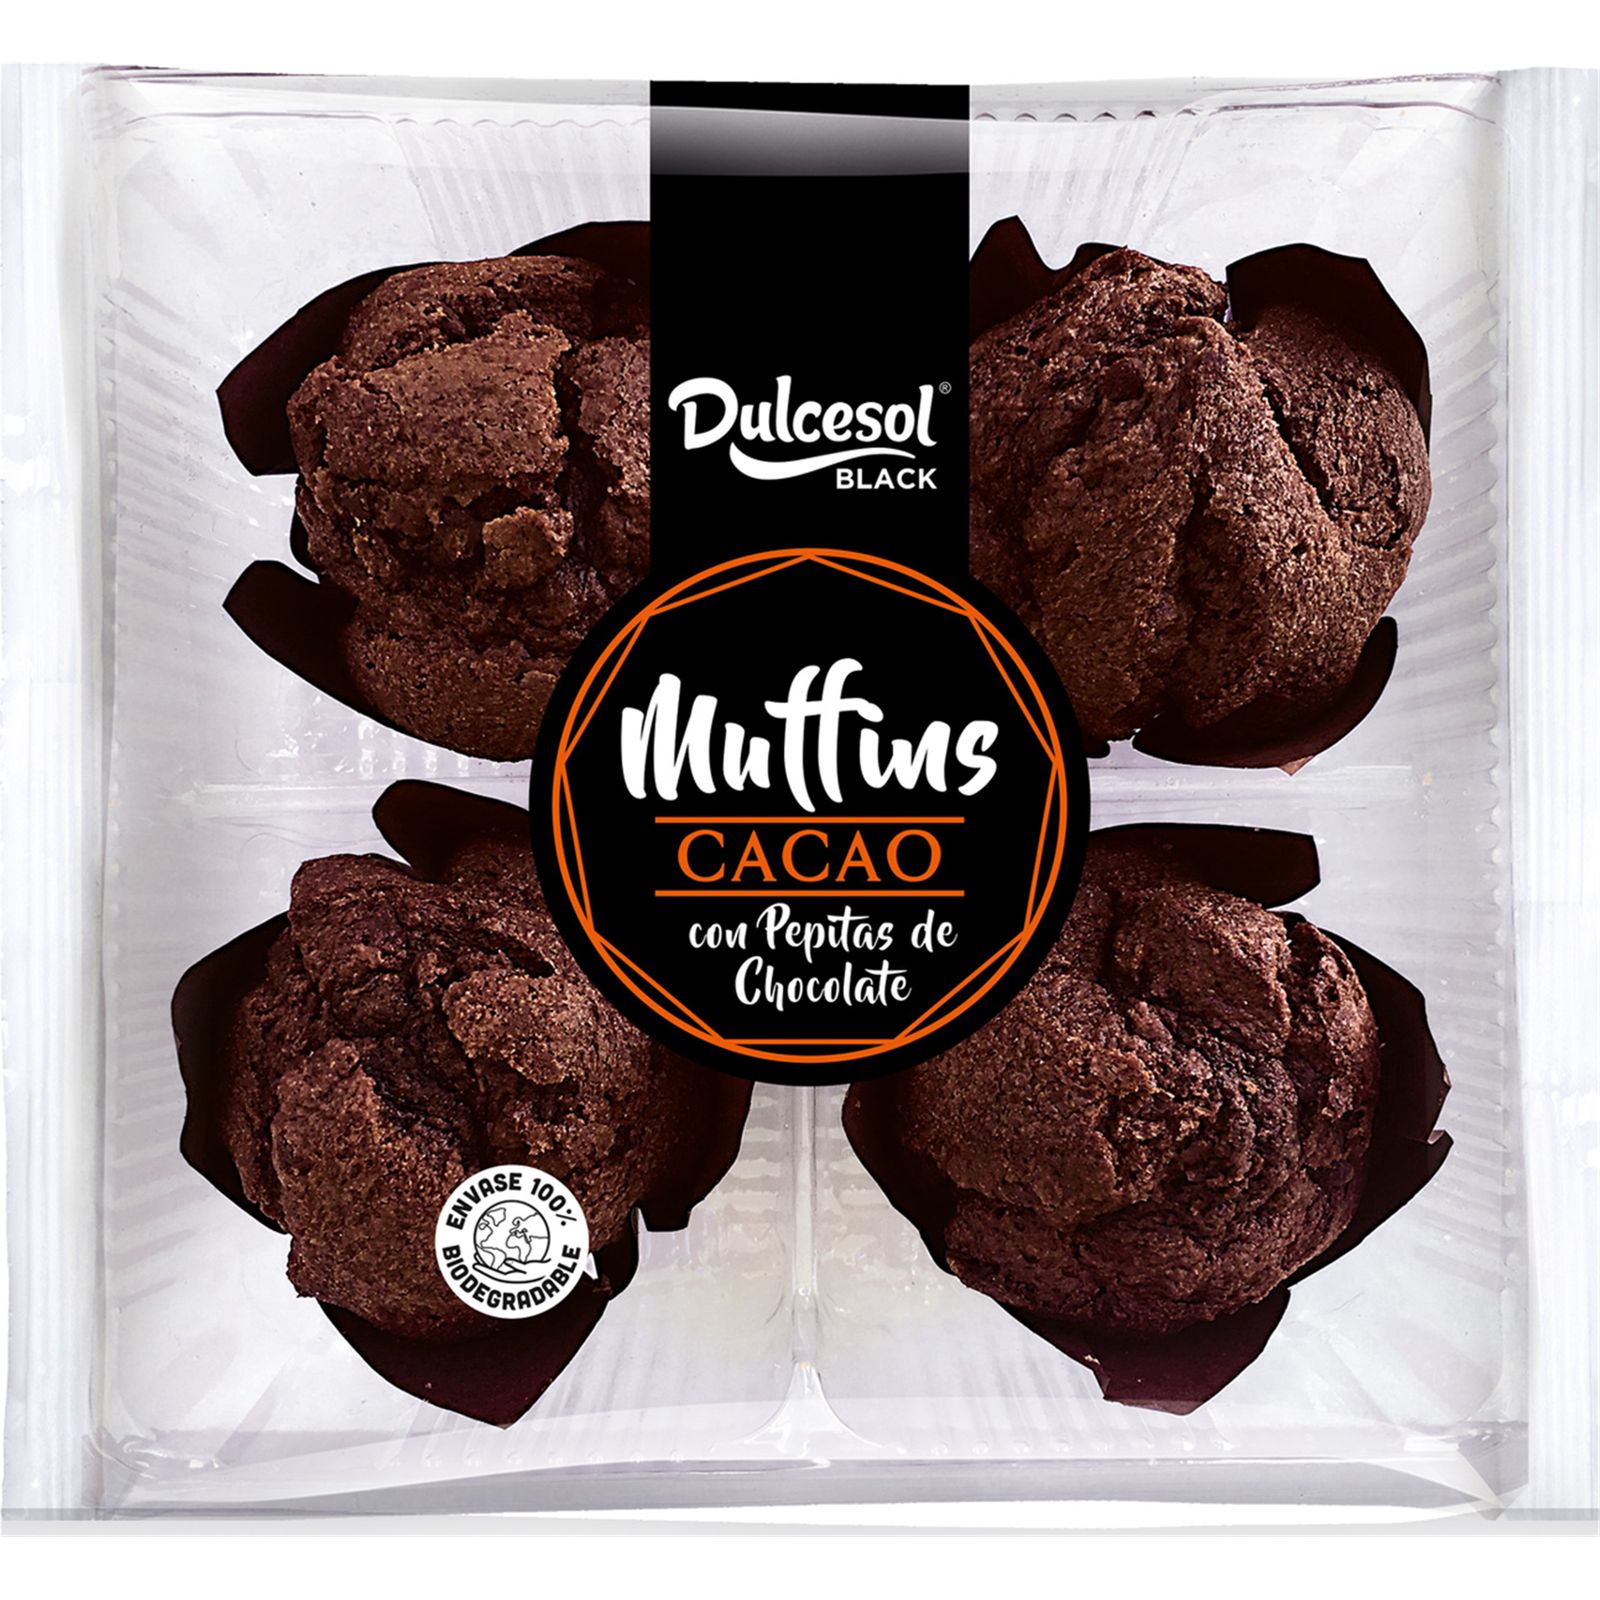 Dulcesol Black Muffins Cacao Con Pepitas De Chocolate 300g RRP 2.65 CLEARANCE XL 1.50